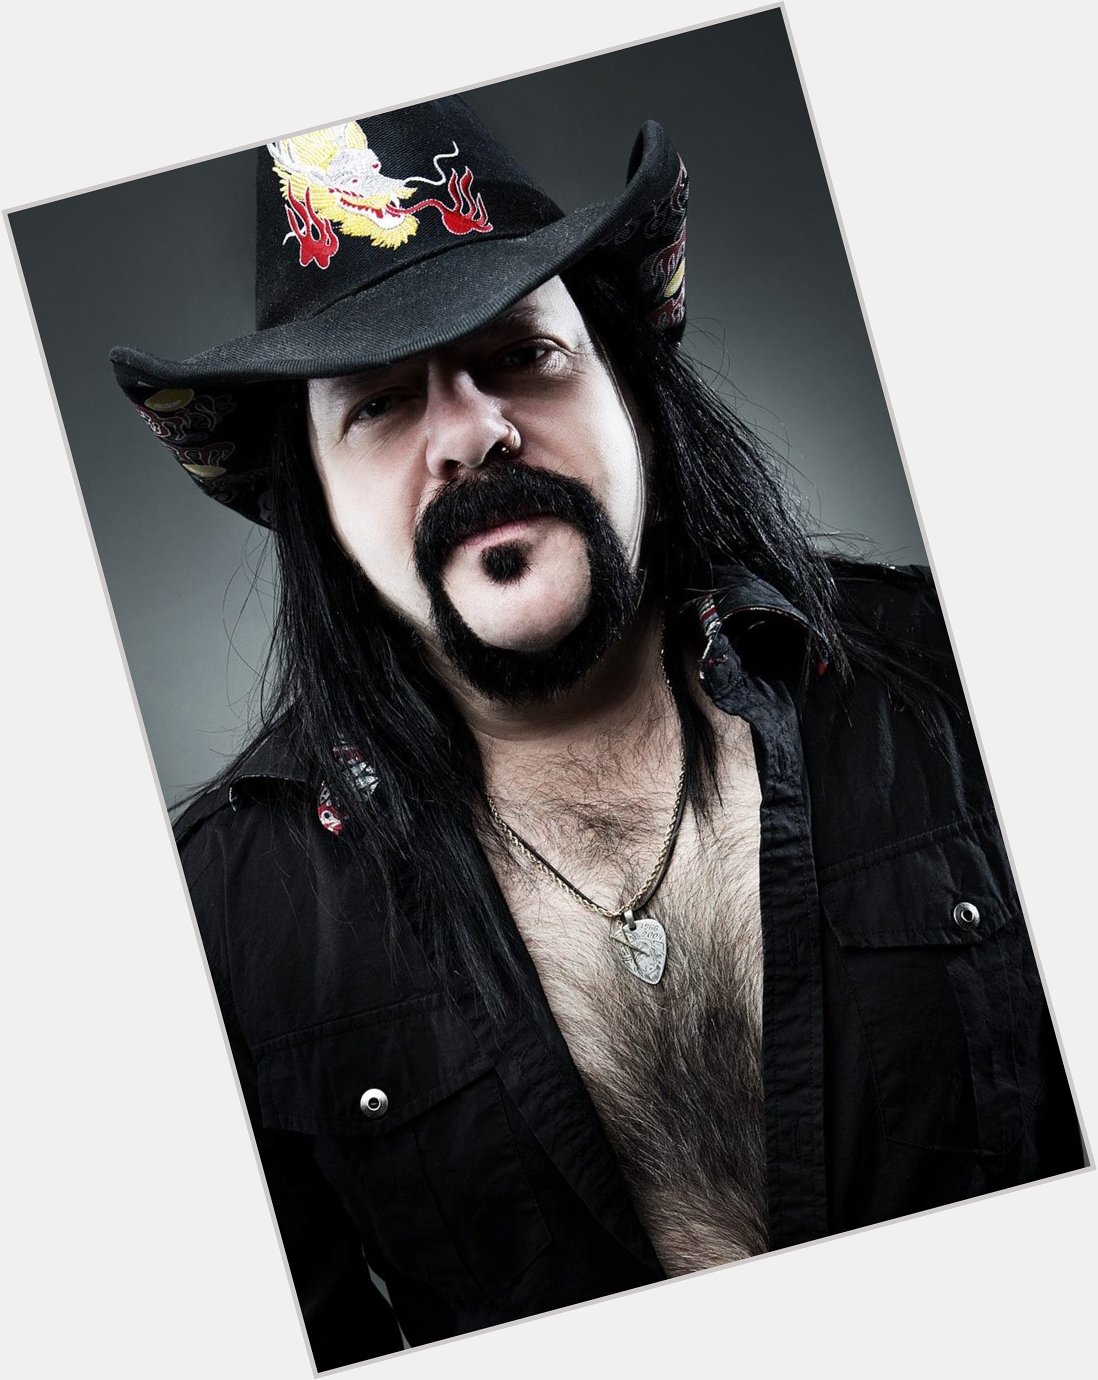 Happy birthday to the master of skins Vinnie Paul. Greatly missed and eternally irreplaceable     